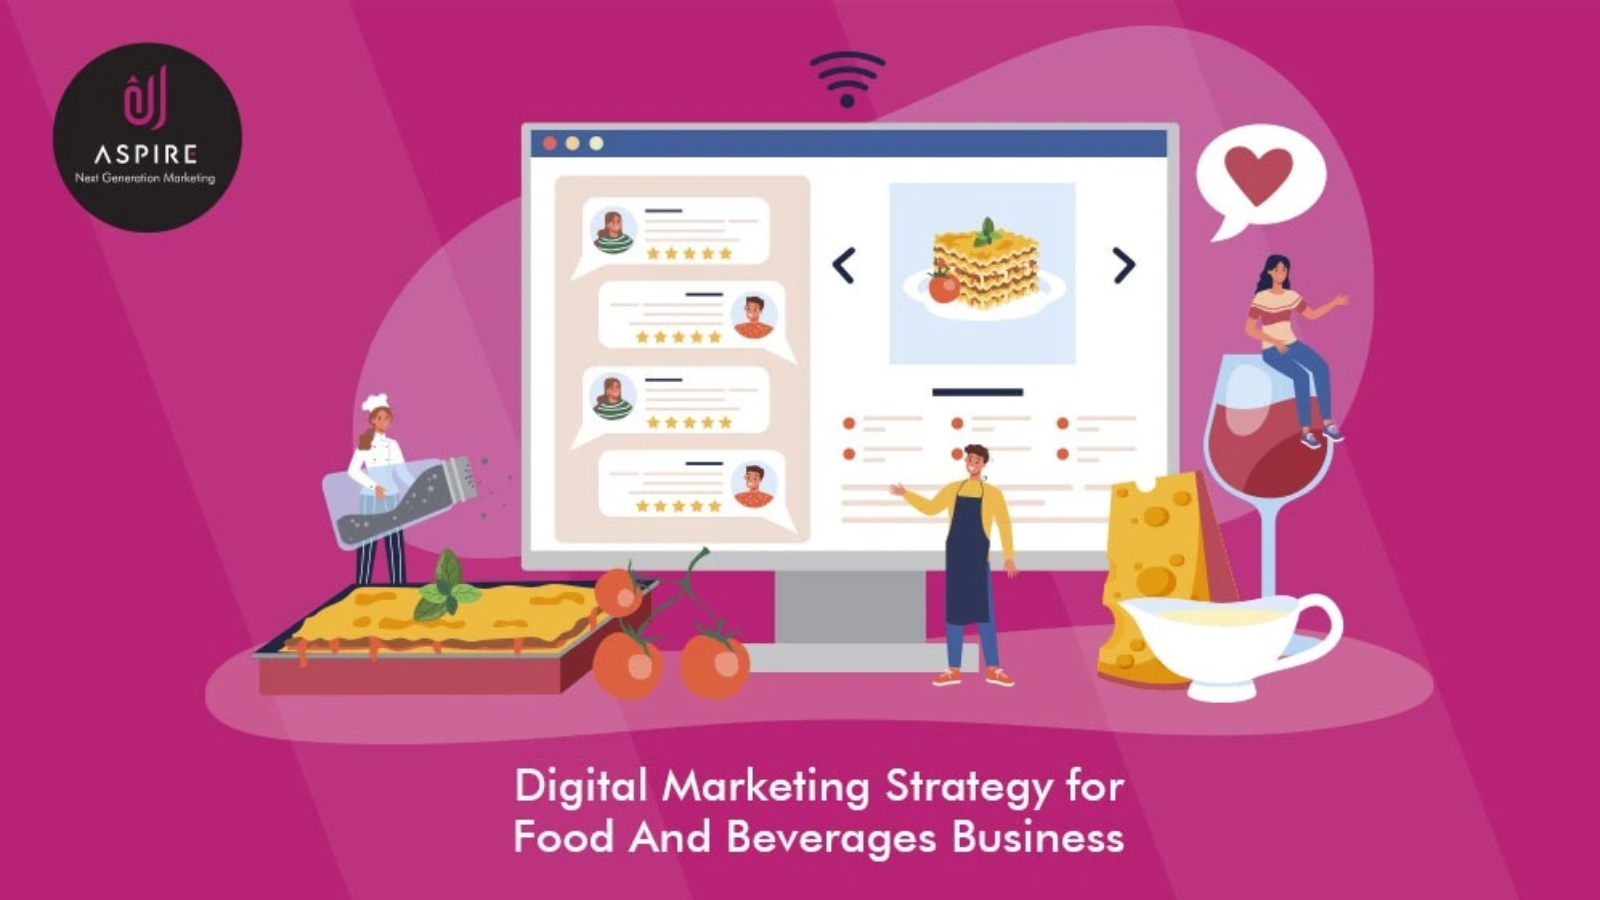 Digital Marketing Strategy for the Food And Beverages Business